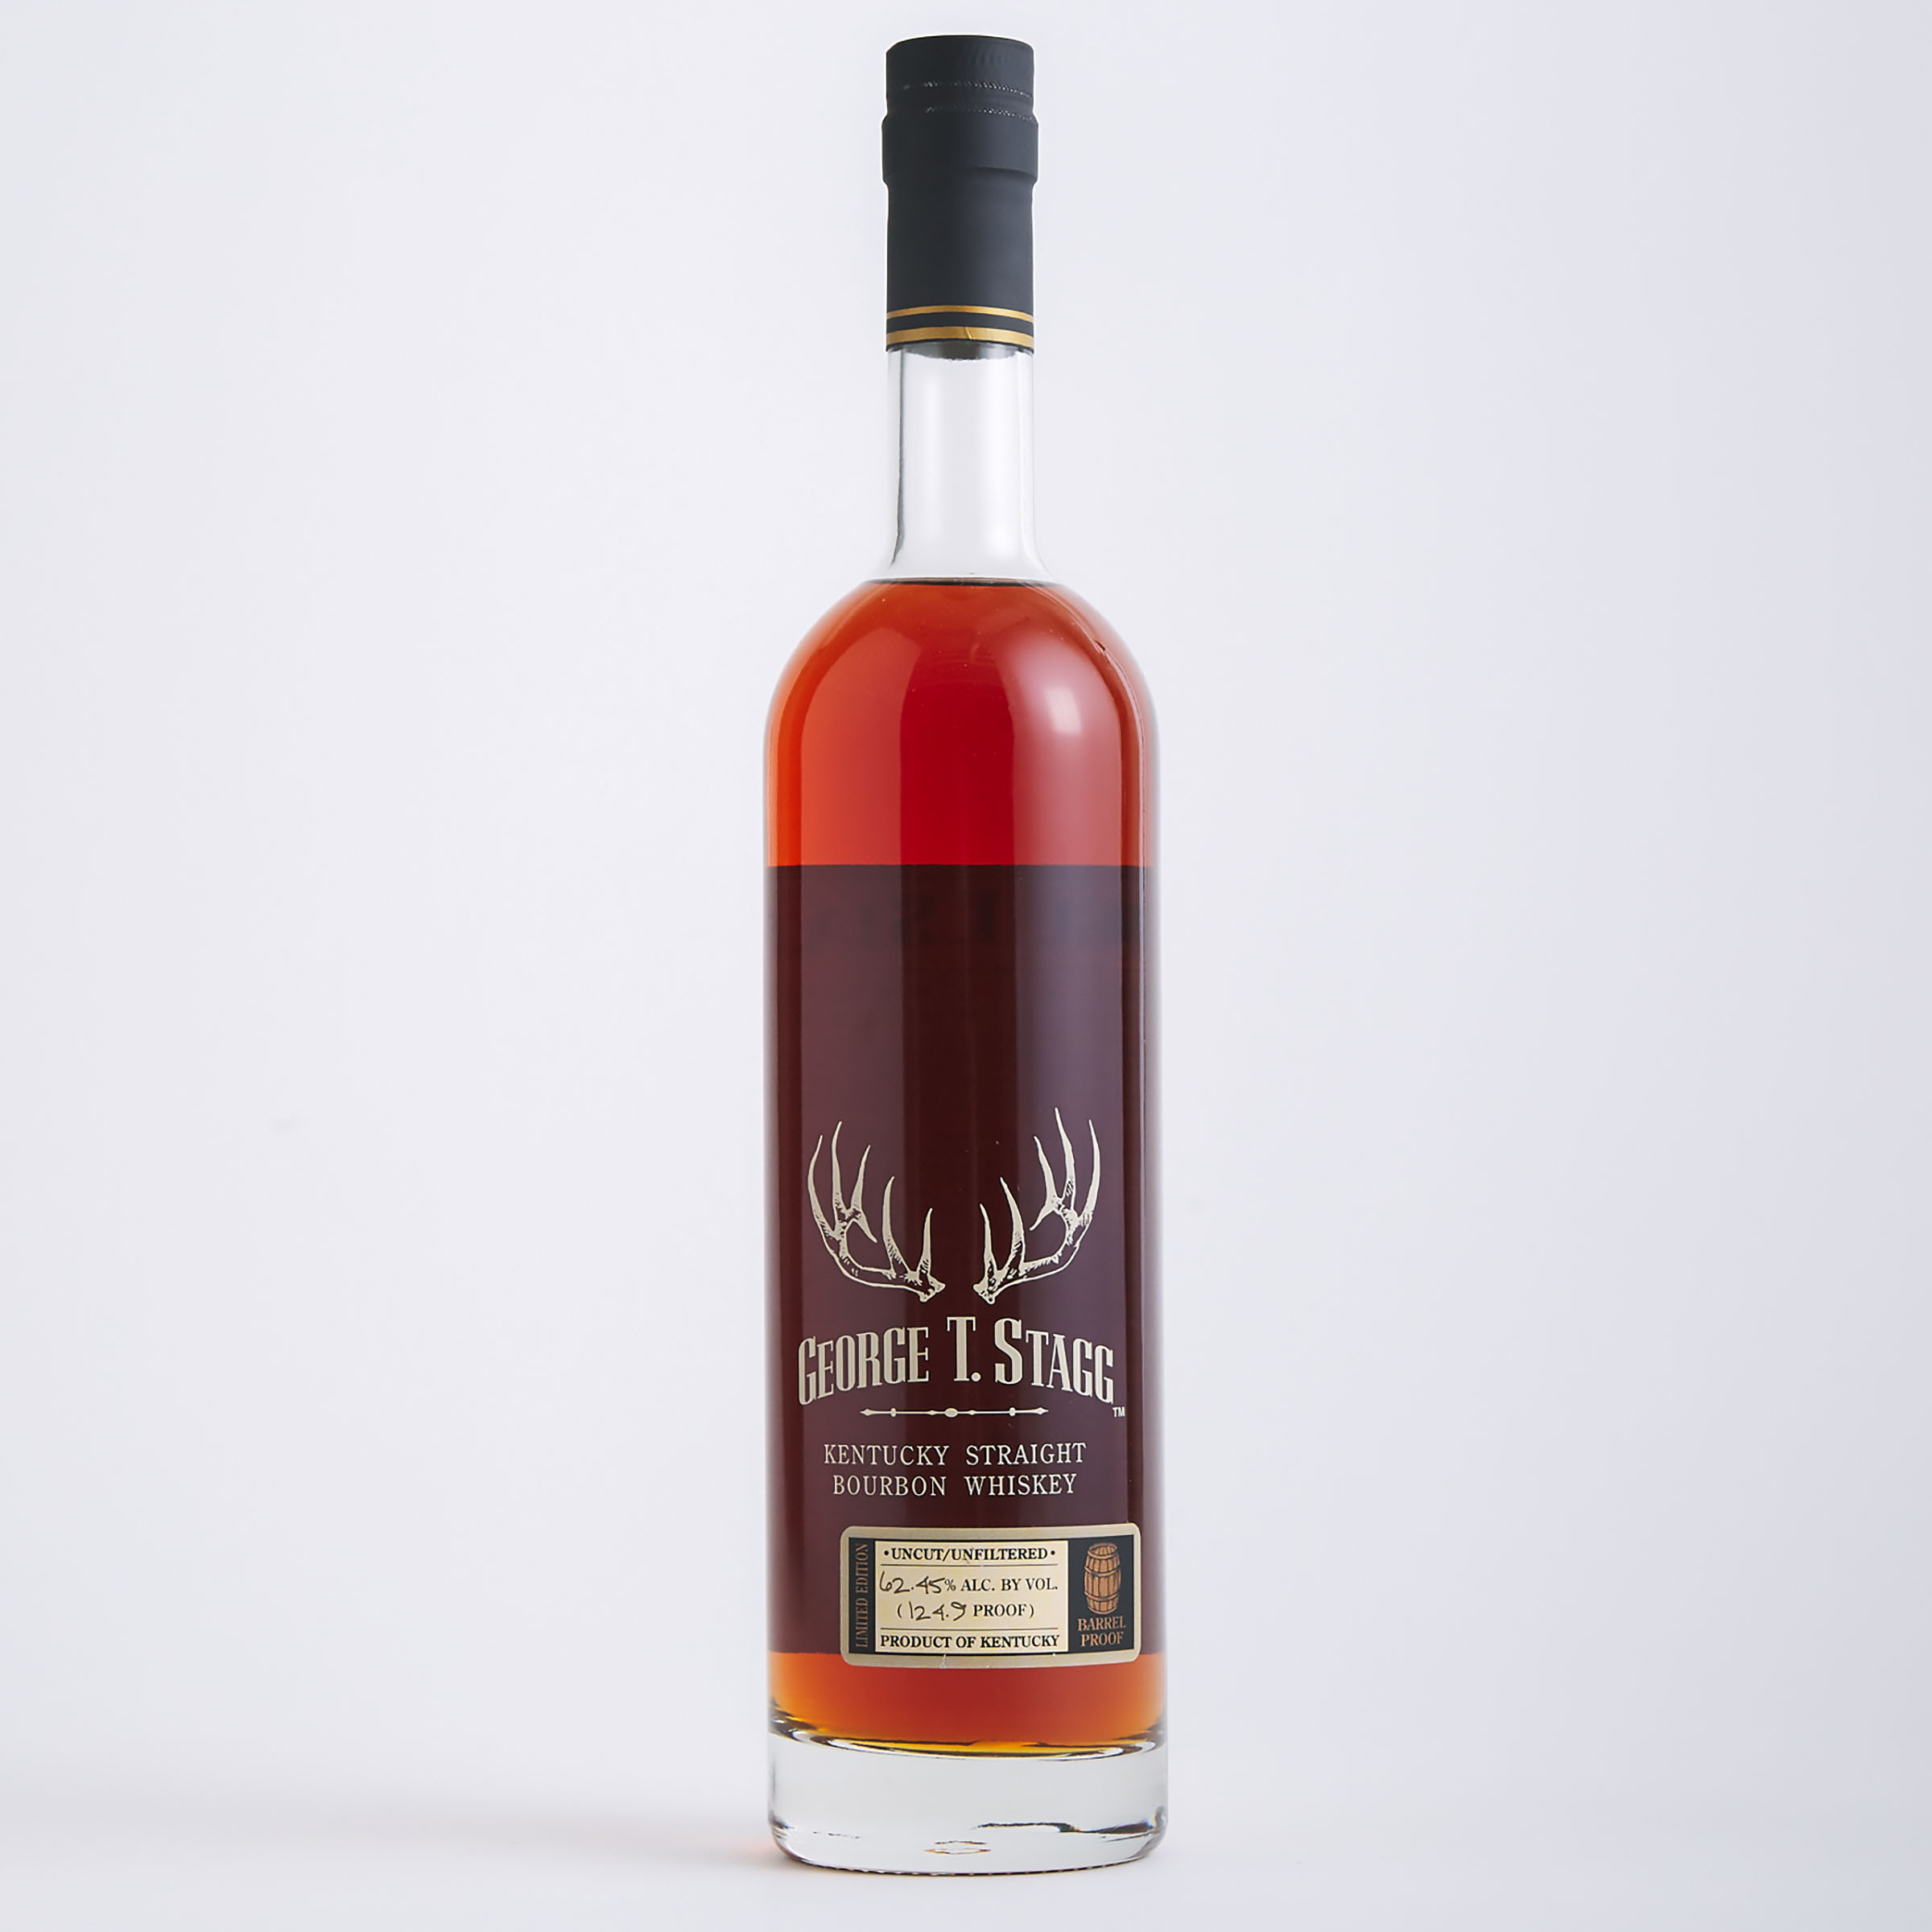 GEORGE T. STAGG KENTUCKY STRAIGHT BOURBON WHISKEY (ONE 750 ML)